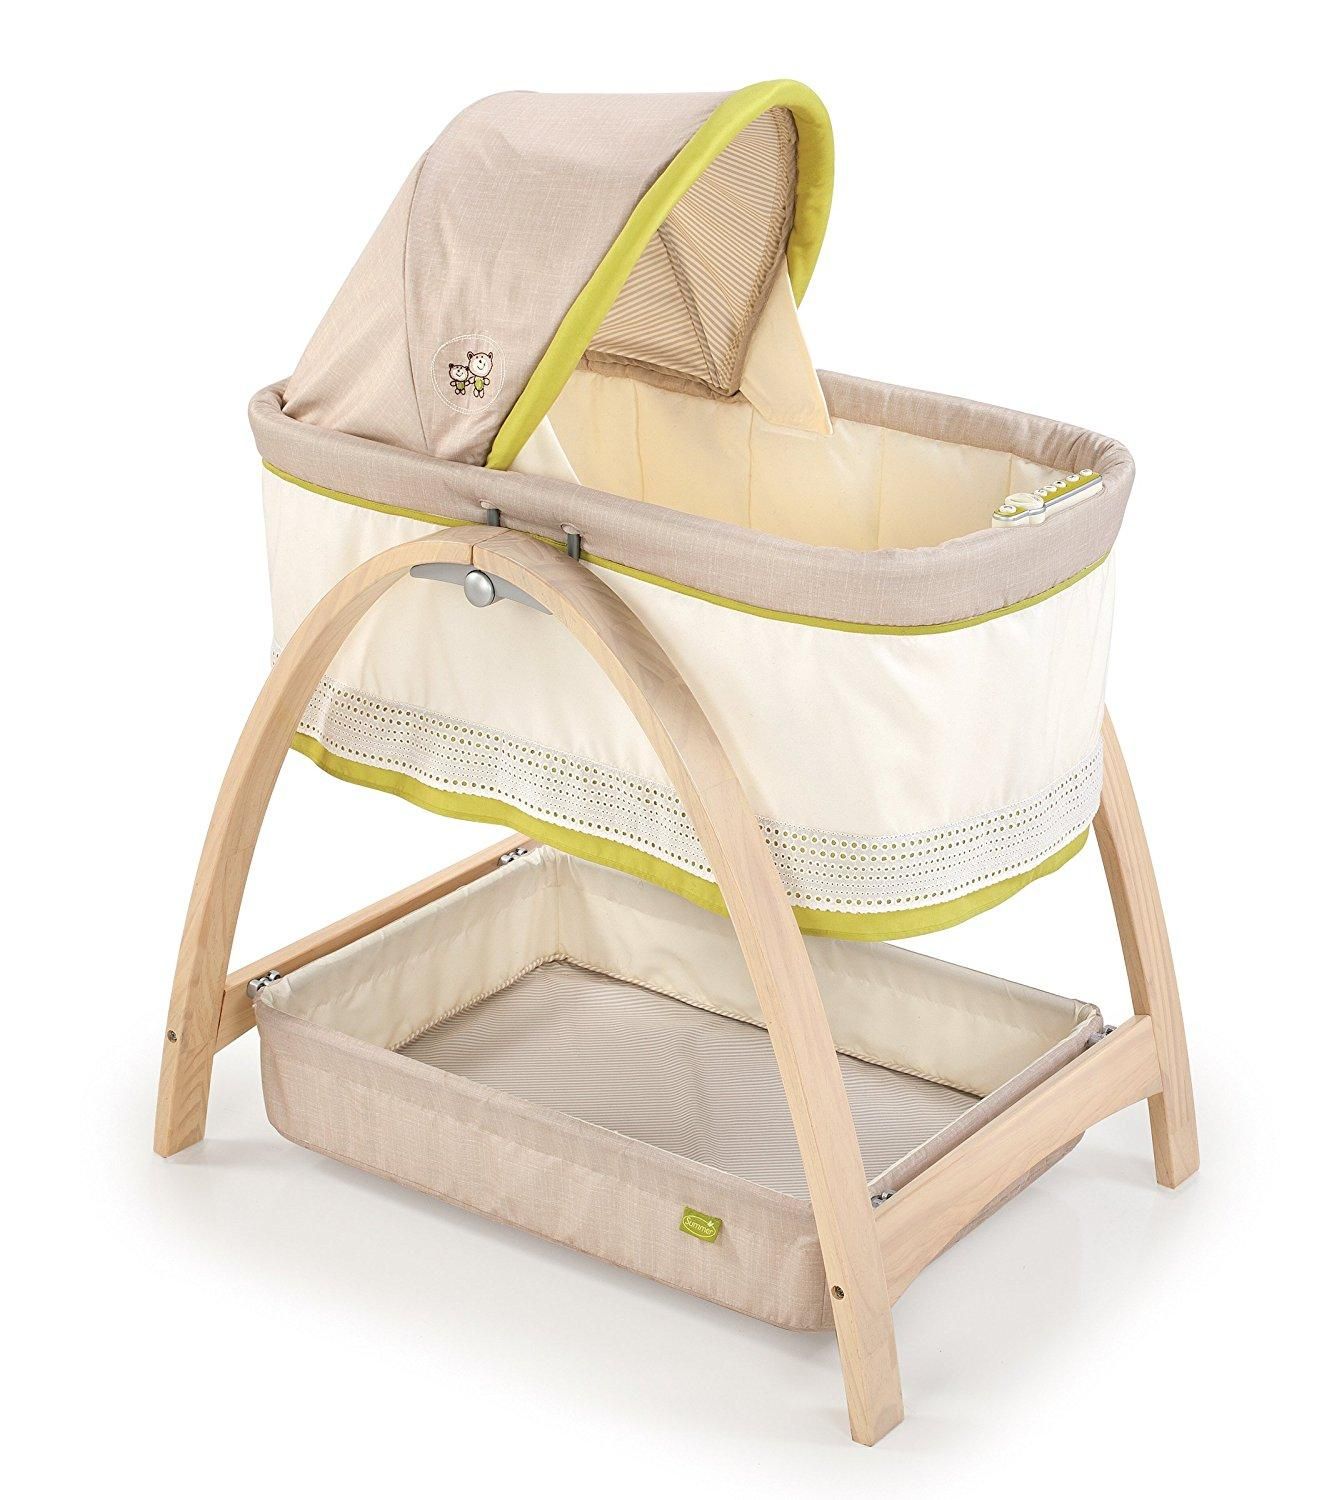 Summer Infant Cream, Bentwood Baby Bassinet With Motion 